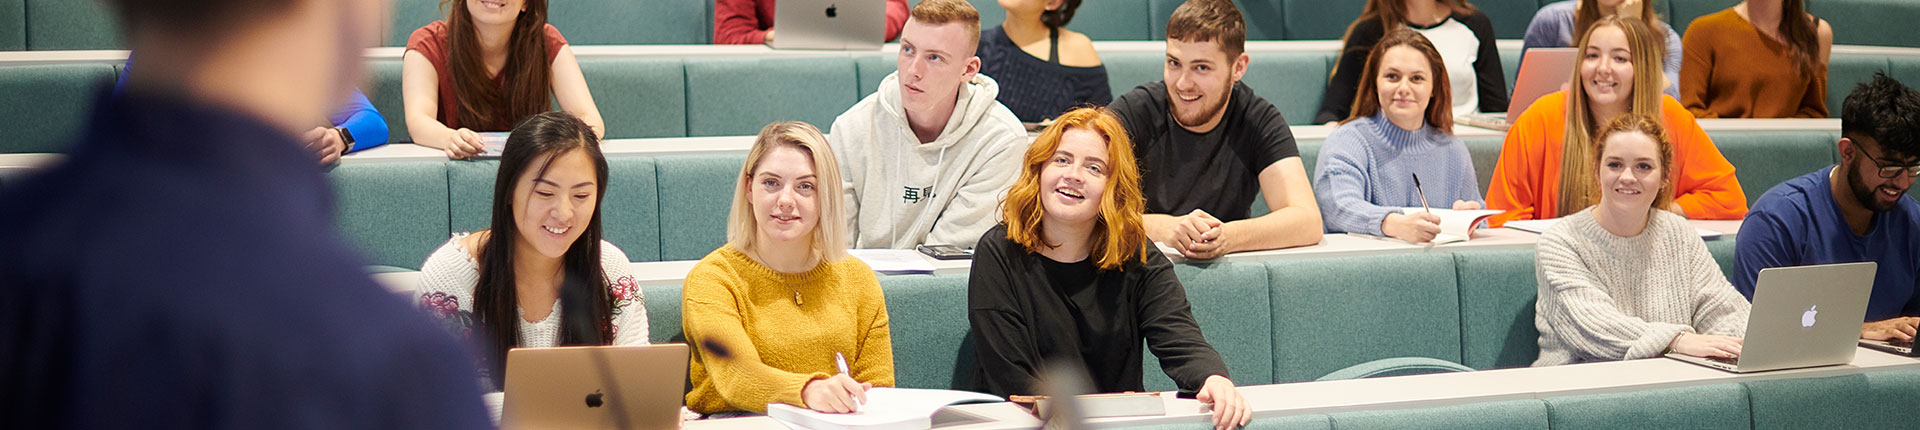 Students sitting in a lecture theatre, looking happy and looking at the lecturer